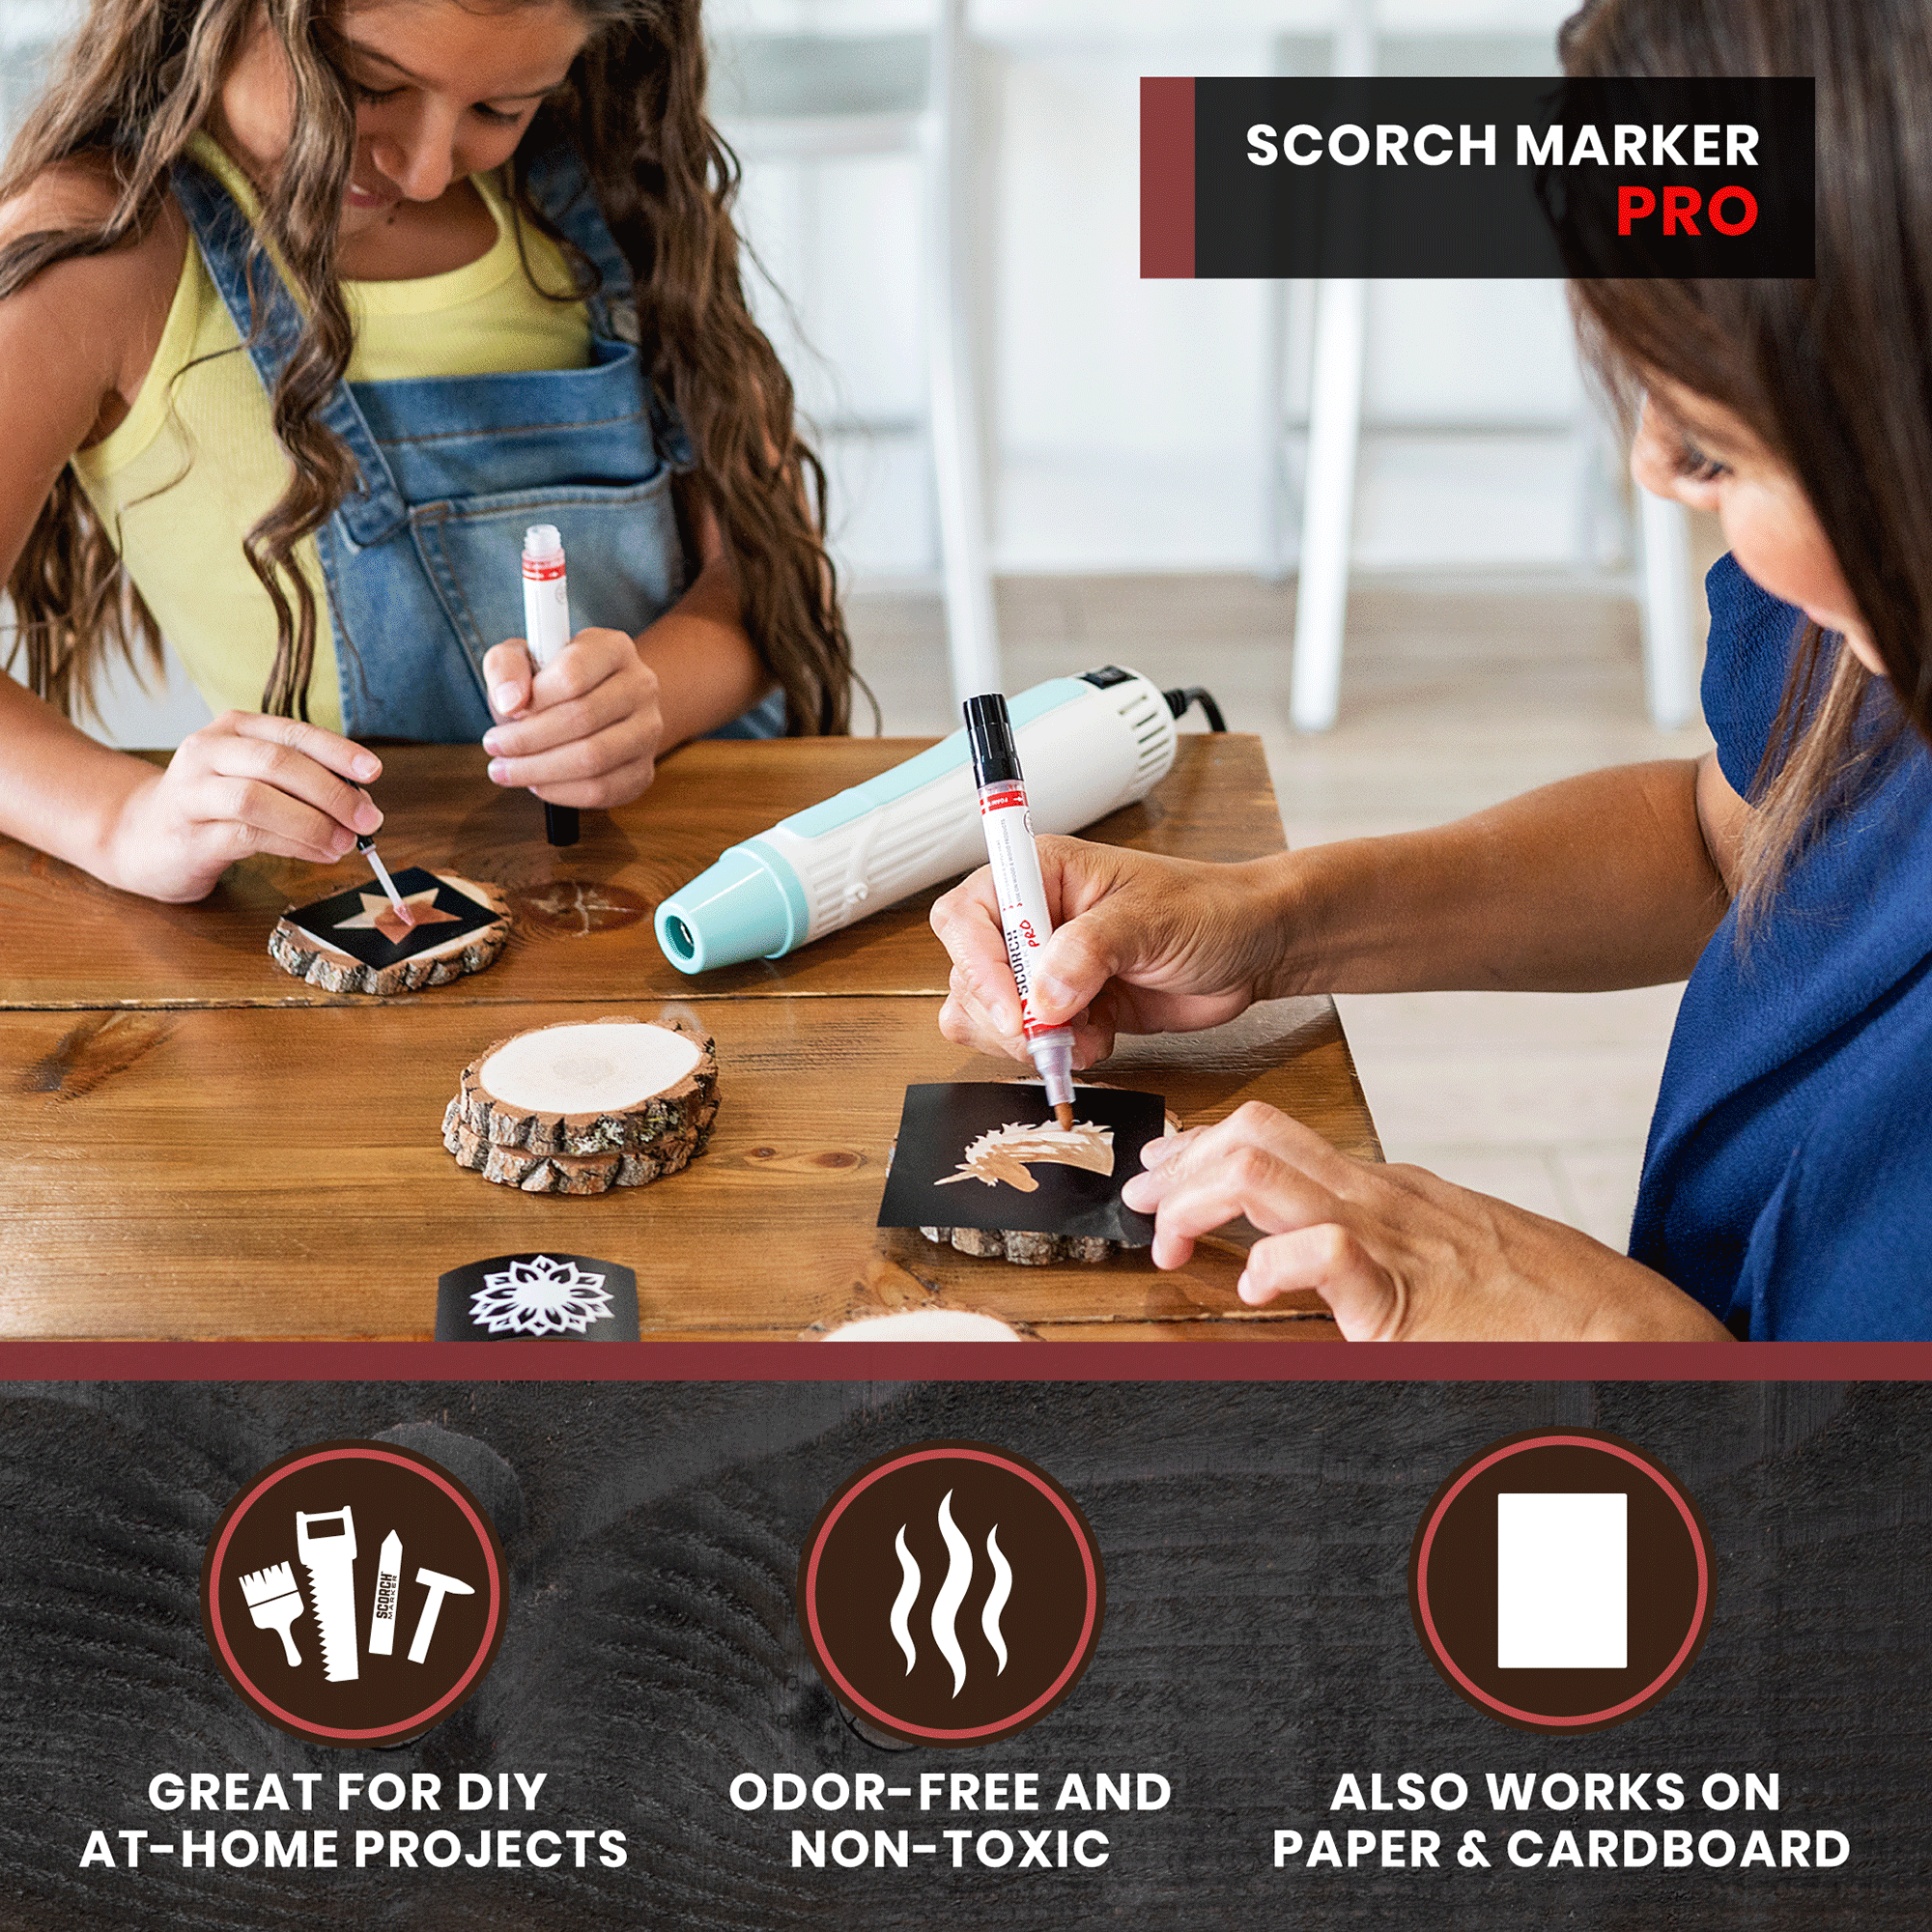 3 MUST KNOW Tips for Using Wood Burning Stencils with Your Scorch Marker